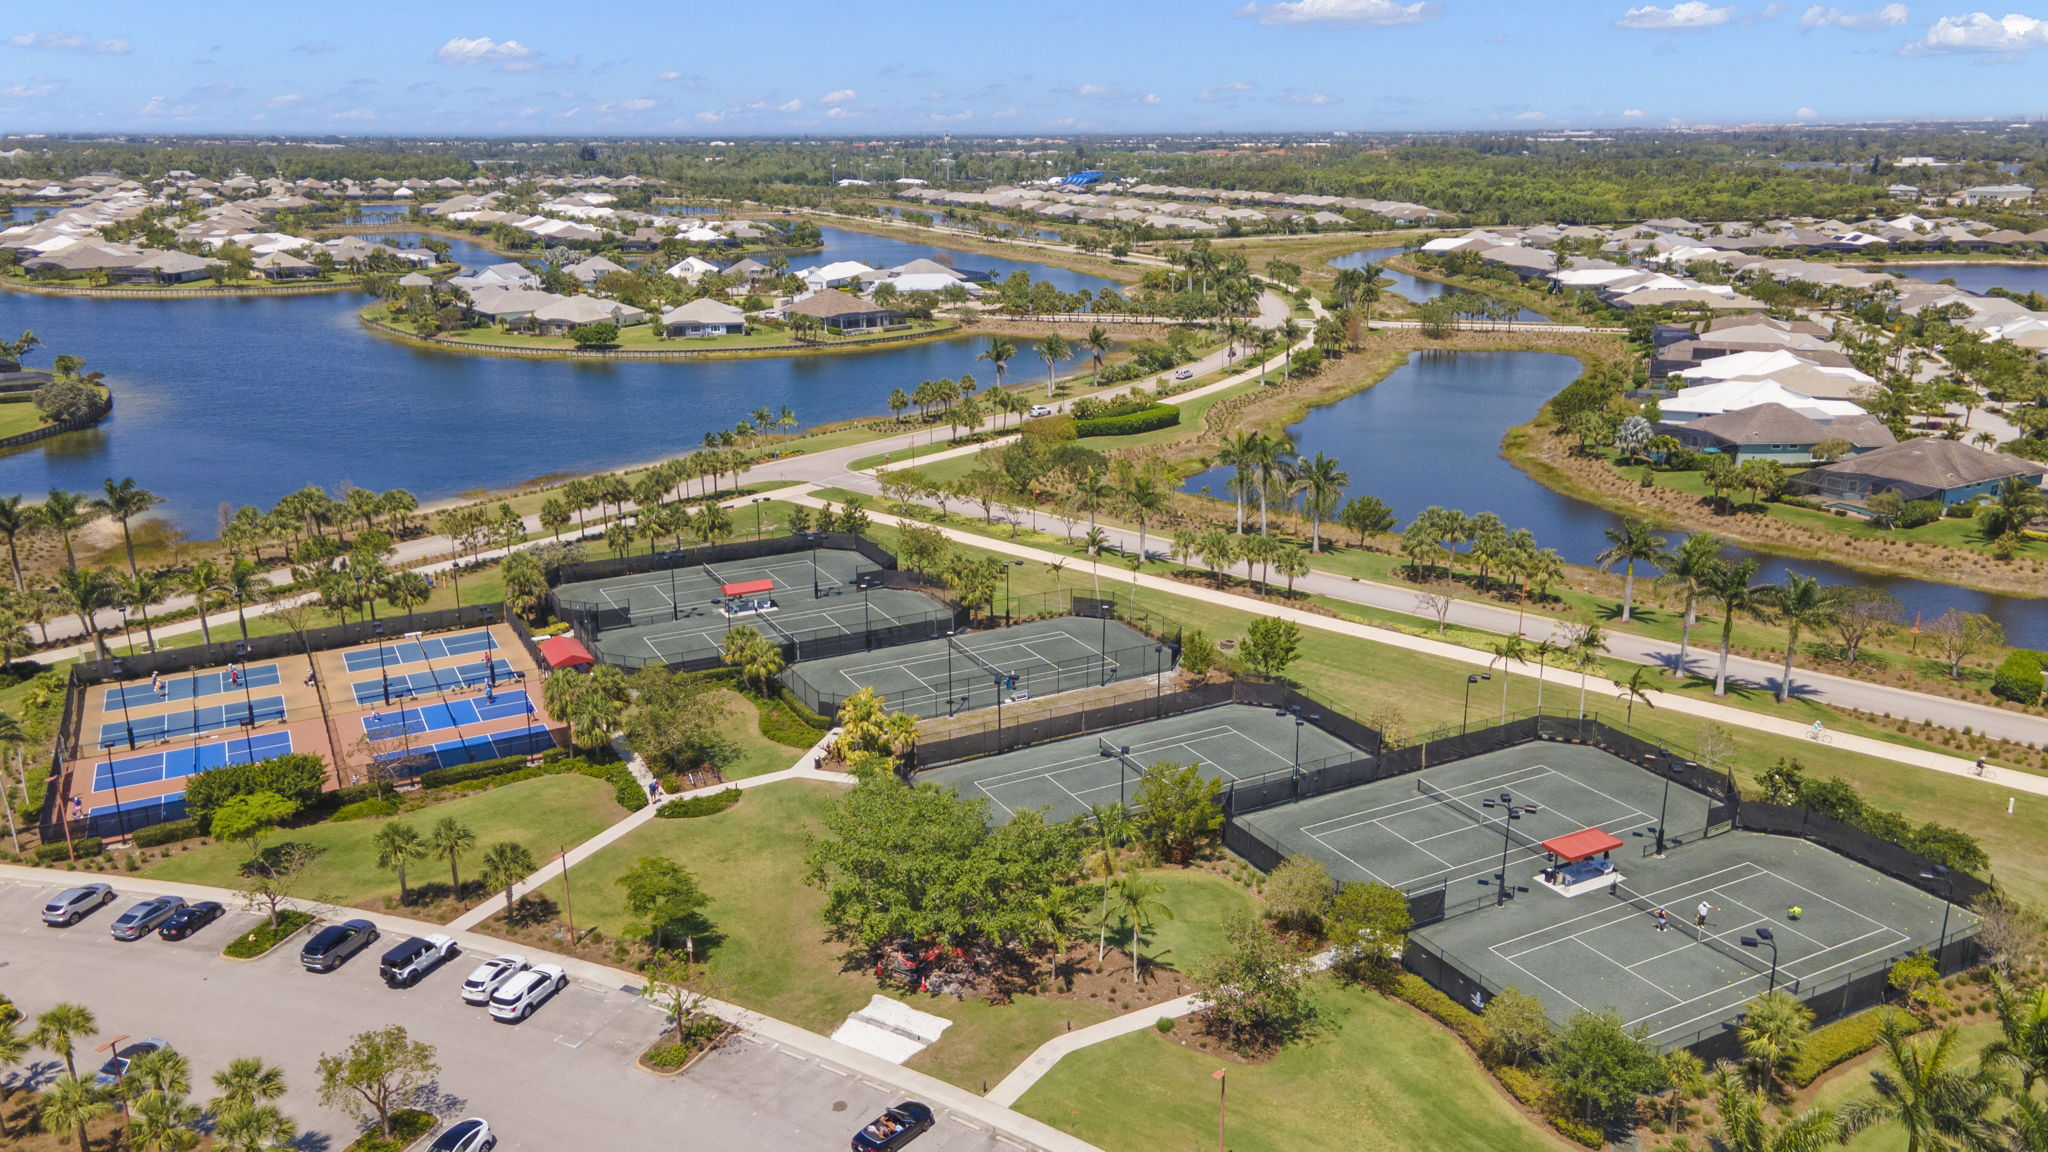 Isles of Collier Tennis and Pickle Ball Courts